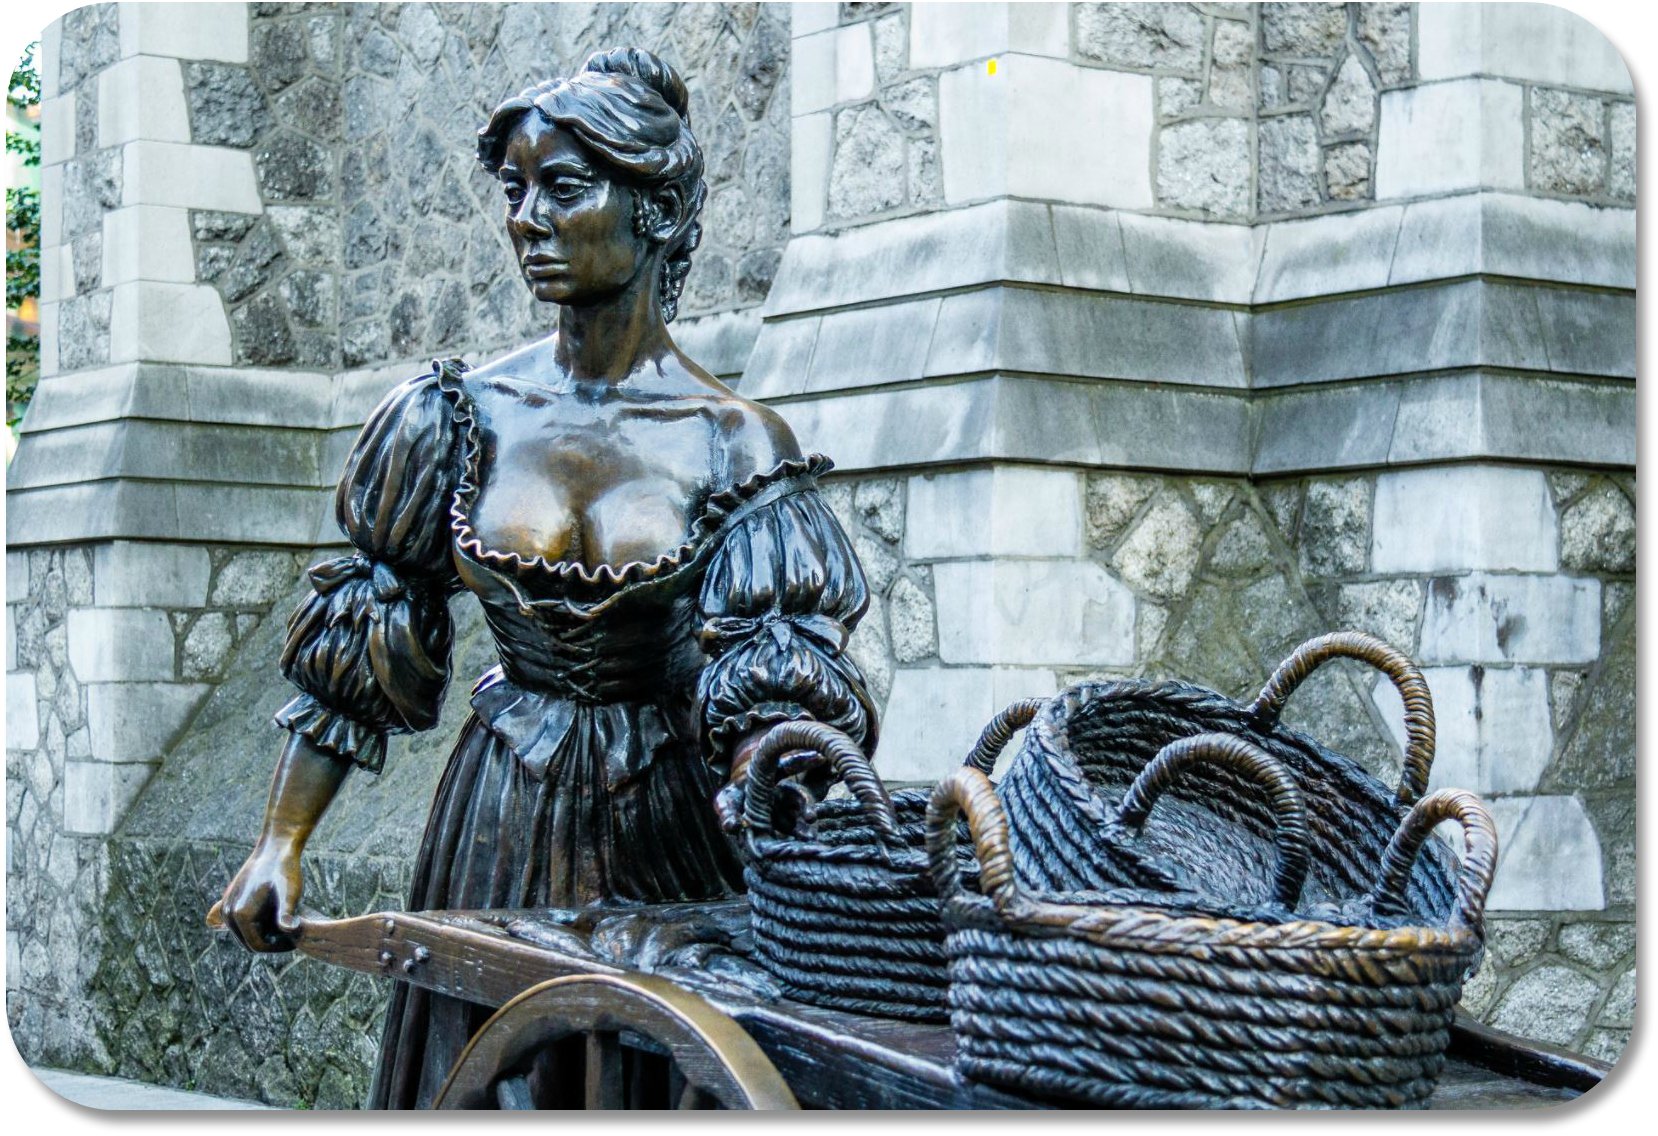 Molly Malone lyrics tell the famous story of a young fishmonger who wanders the streets of Dublin and dies of a fever at a young age.  More fun than it sounds!